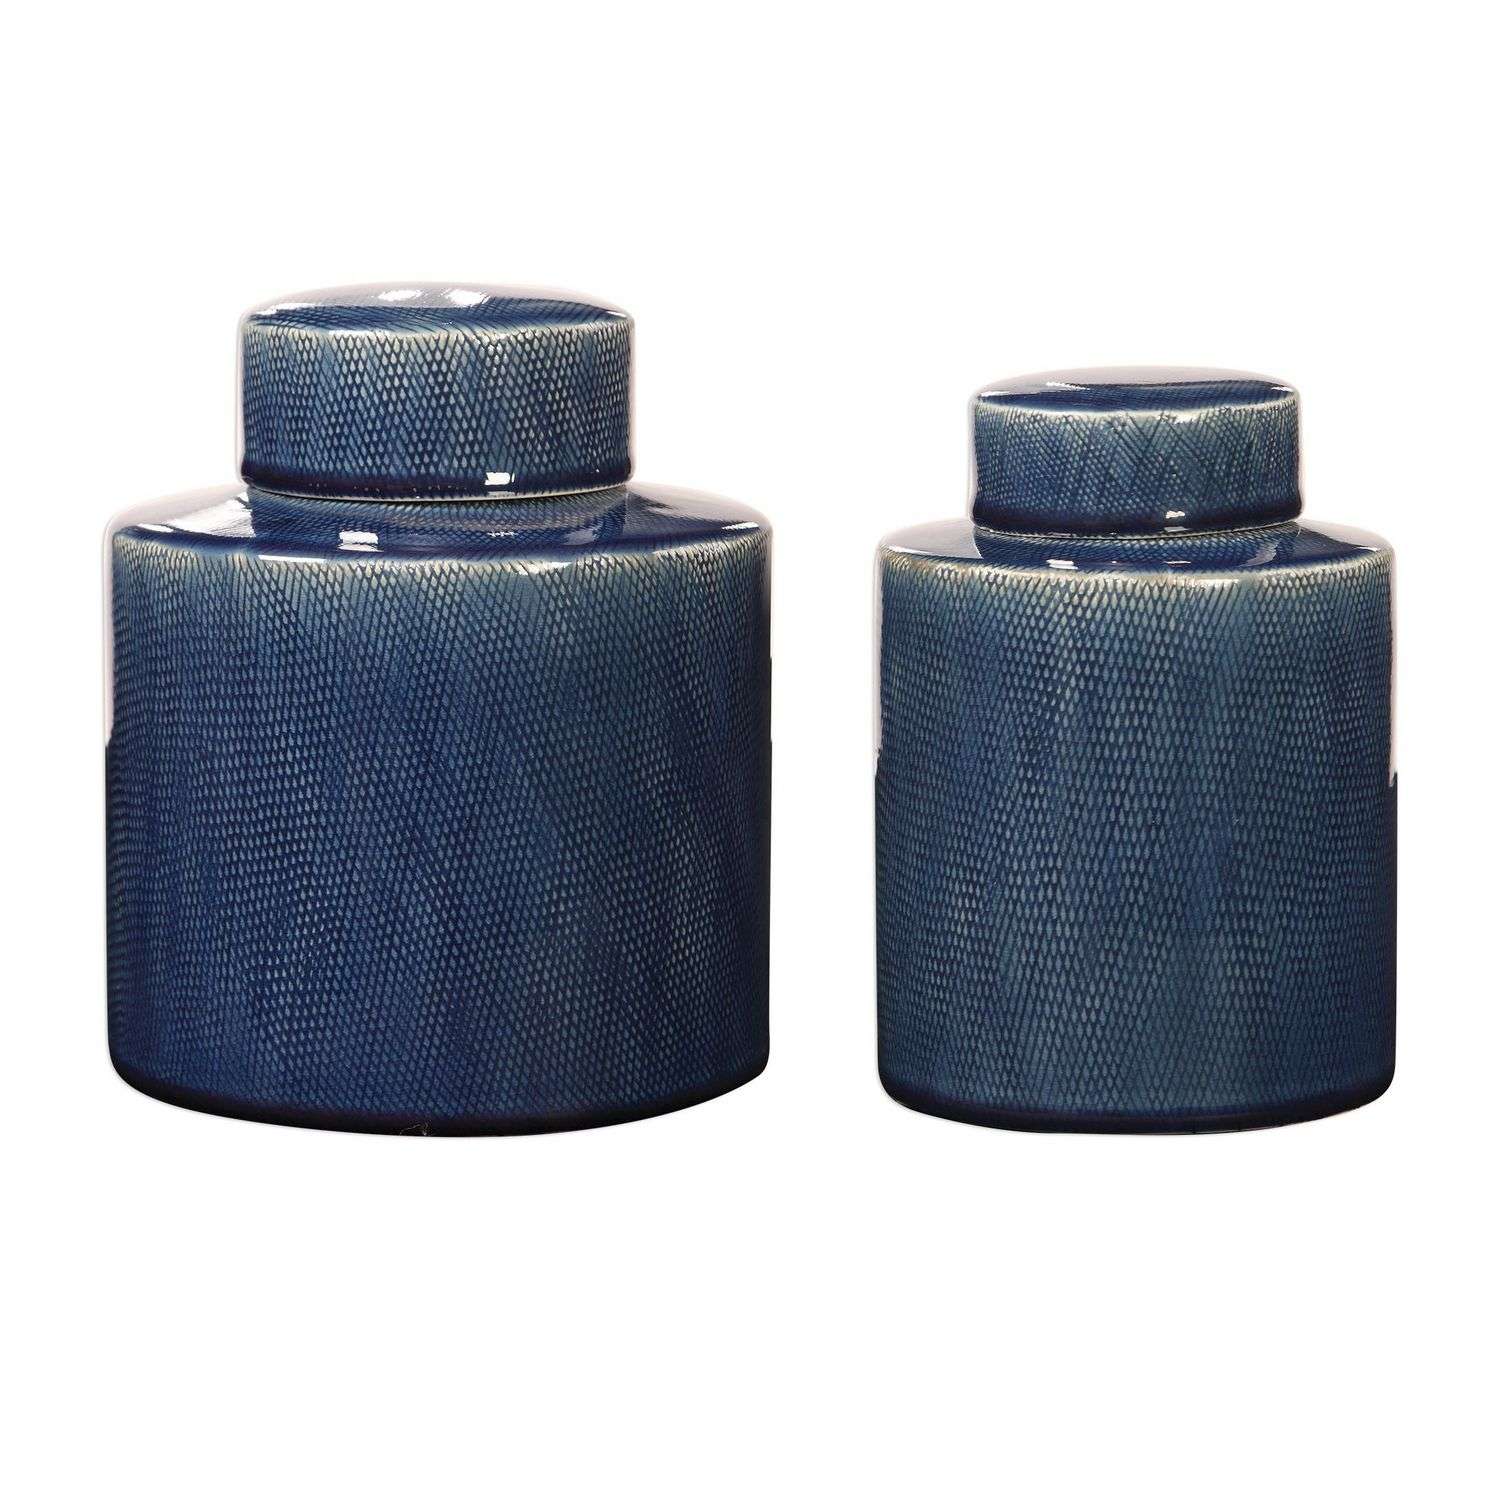 Uttermost Saniya Containers - Set of 2 - Blue